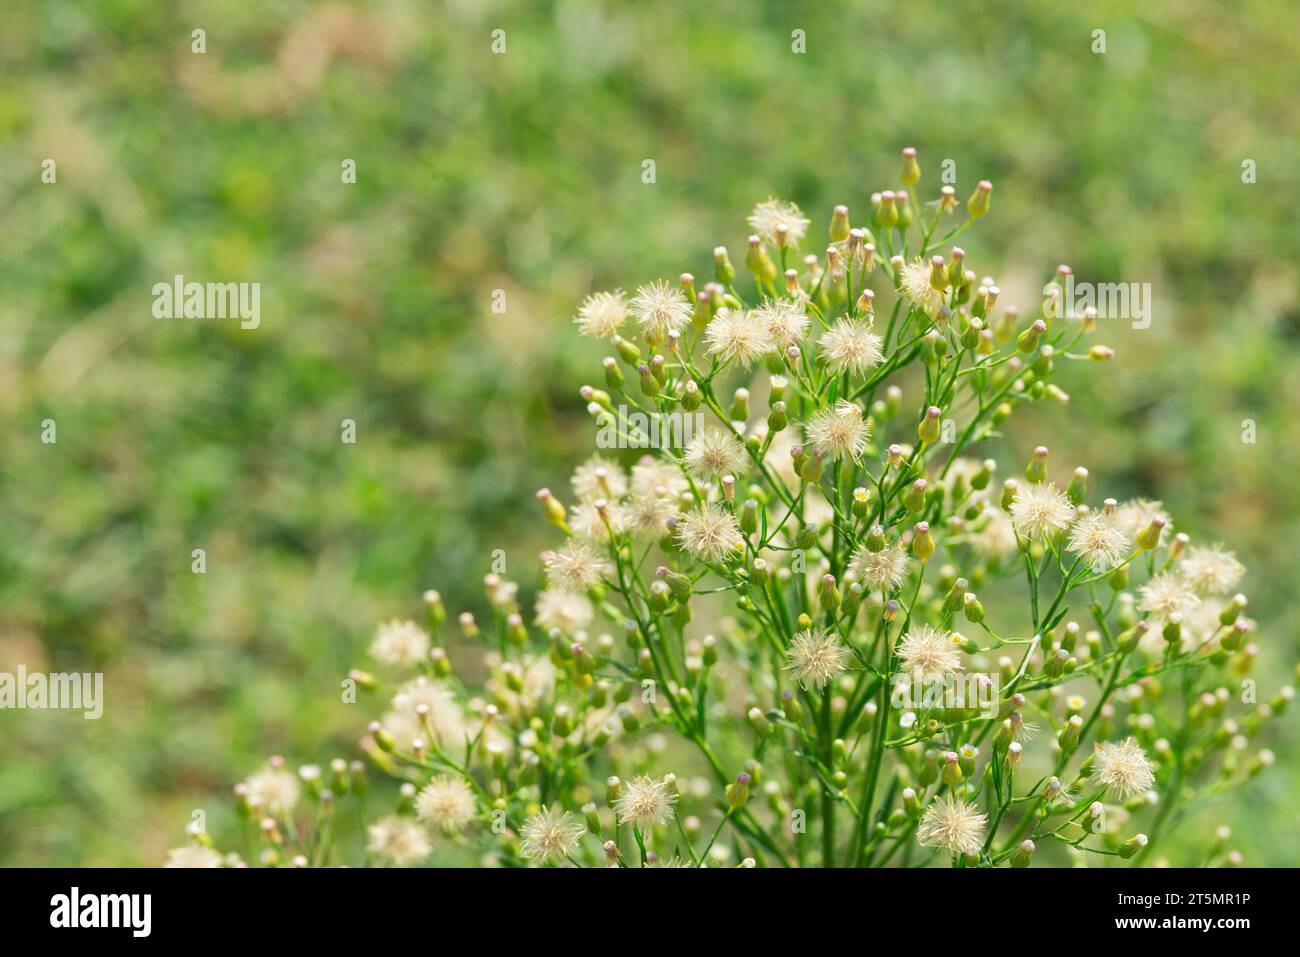 Italy, Lombardy, Horseweed Flosers, Erigeron Canadensis Stock Photo